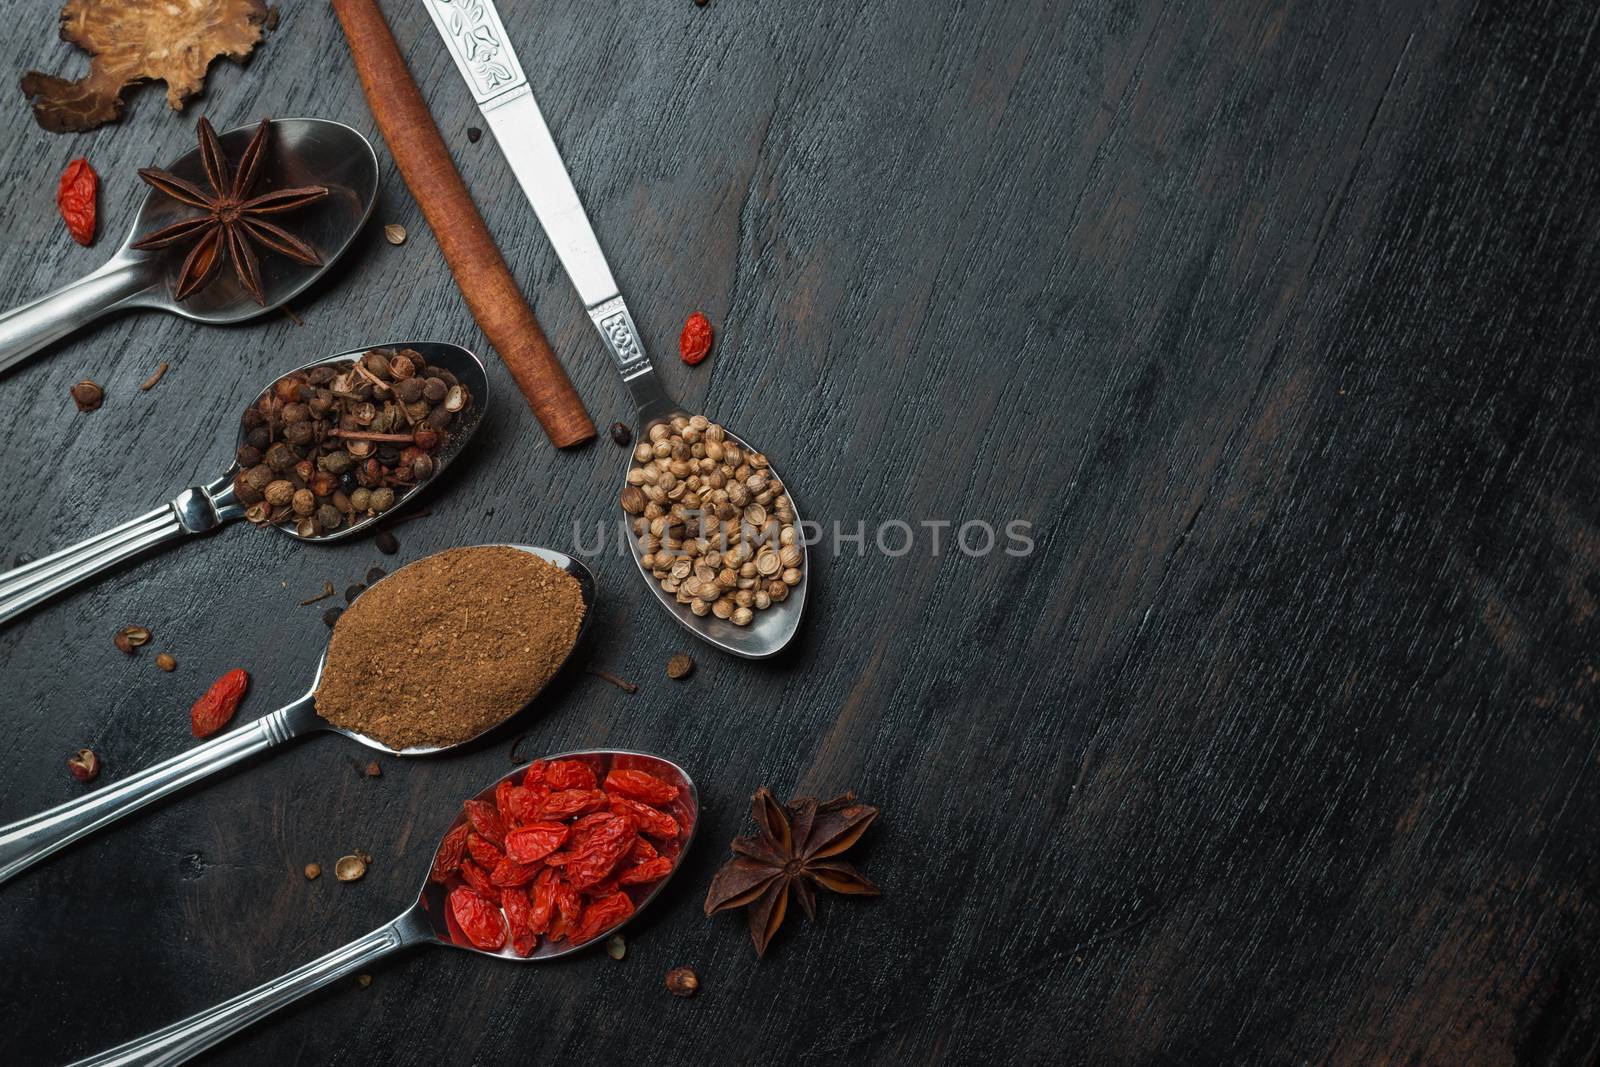 Spices and herbs by AEyZRiO